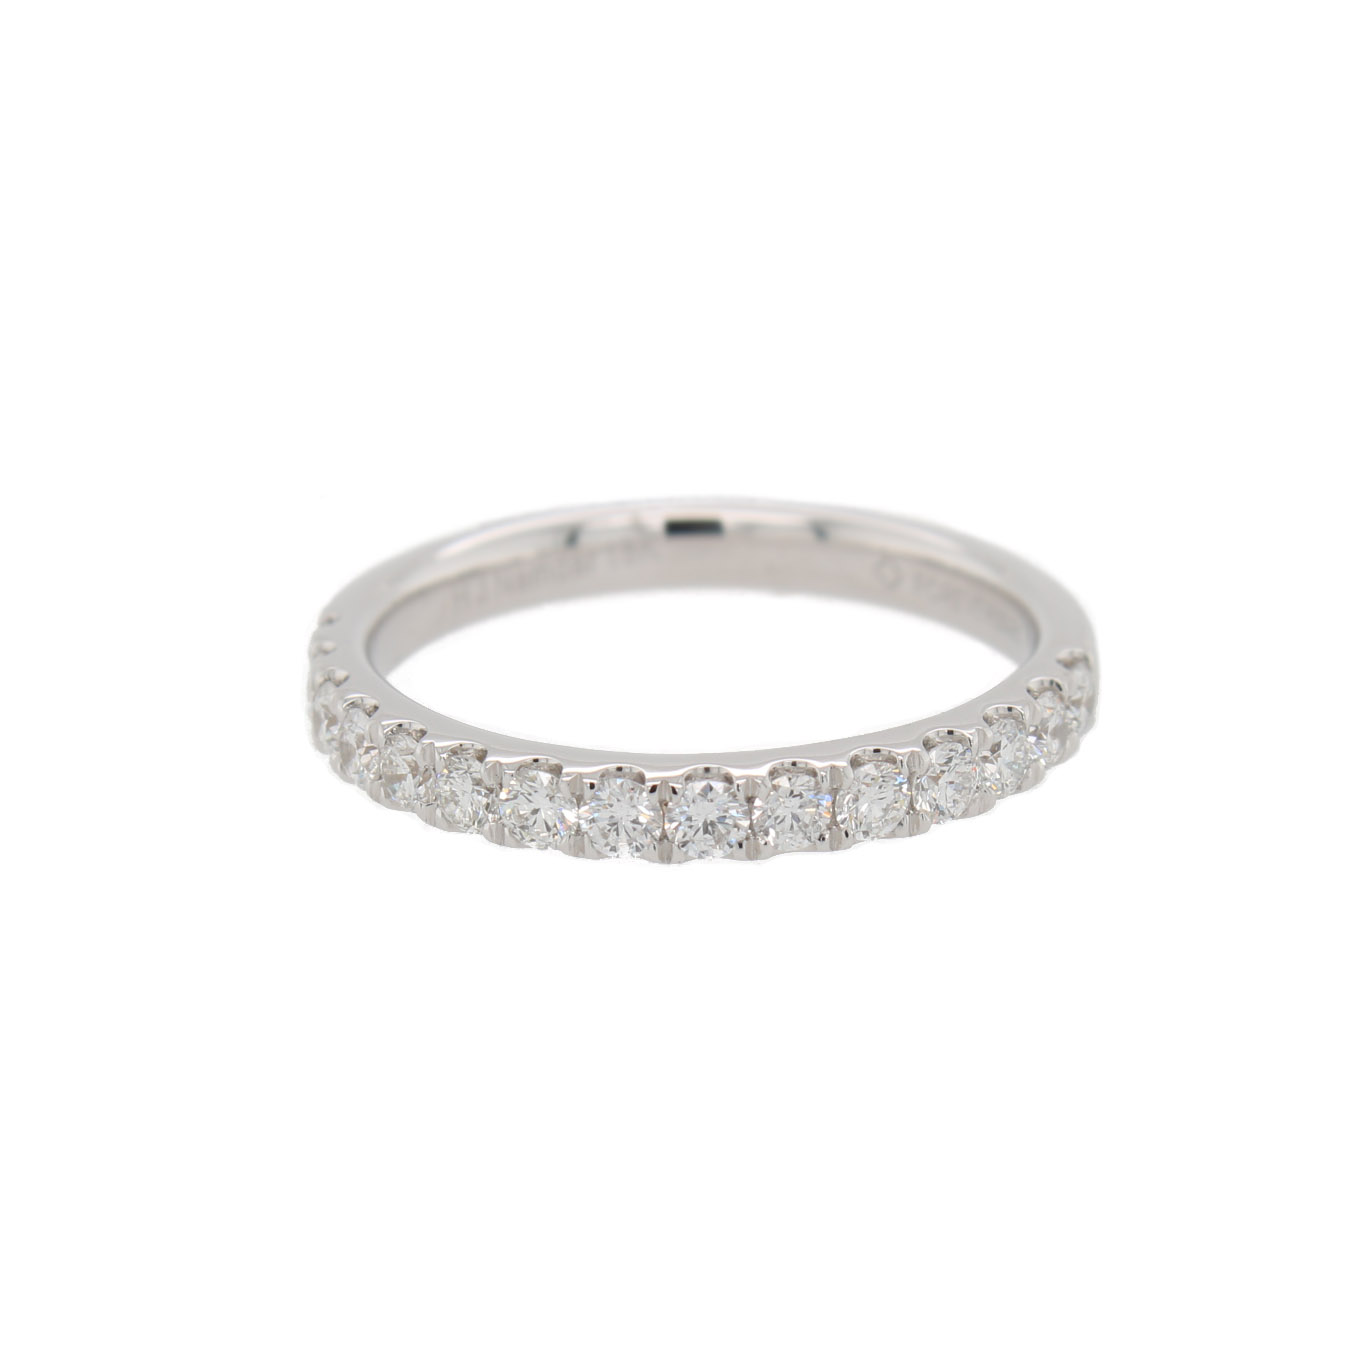 This 15 stone diamond ring from The Forevermark Tribute™ Collection is crafted from 18k white gold and features 0.50 total carats of diamonds.